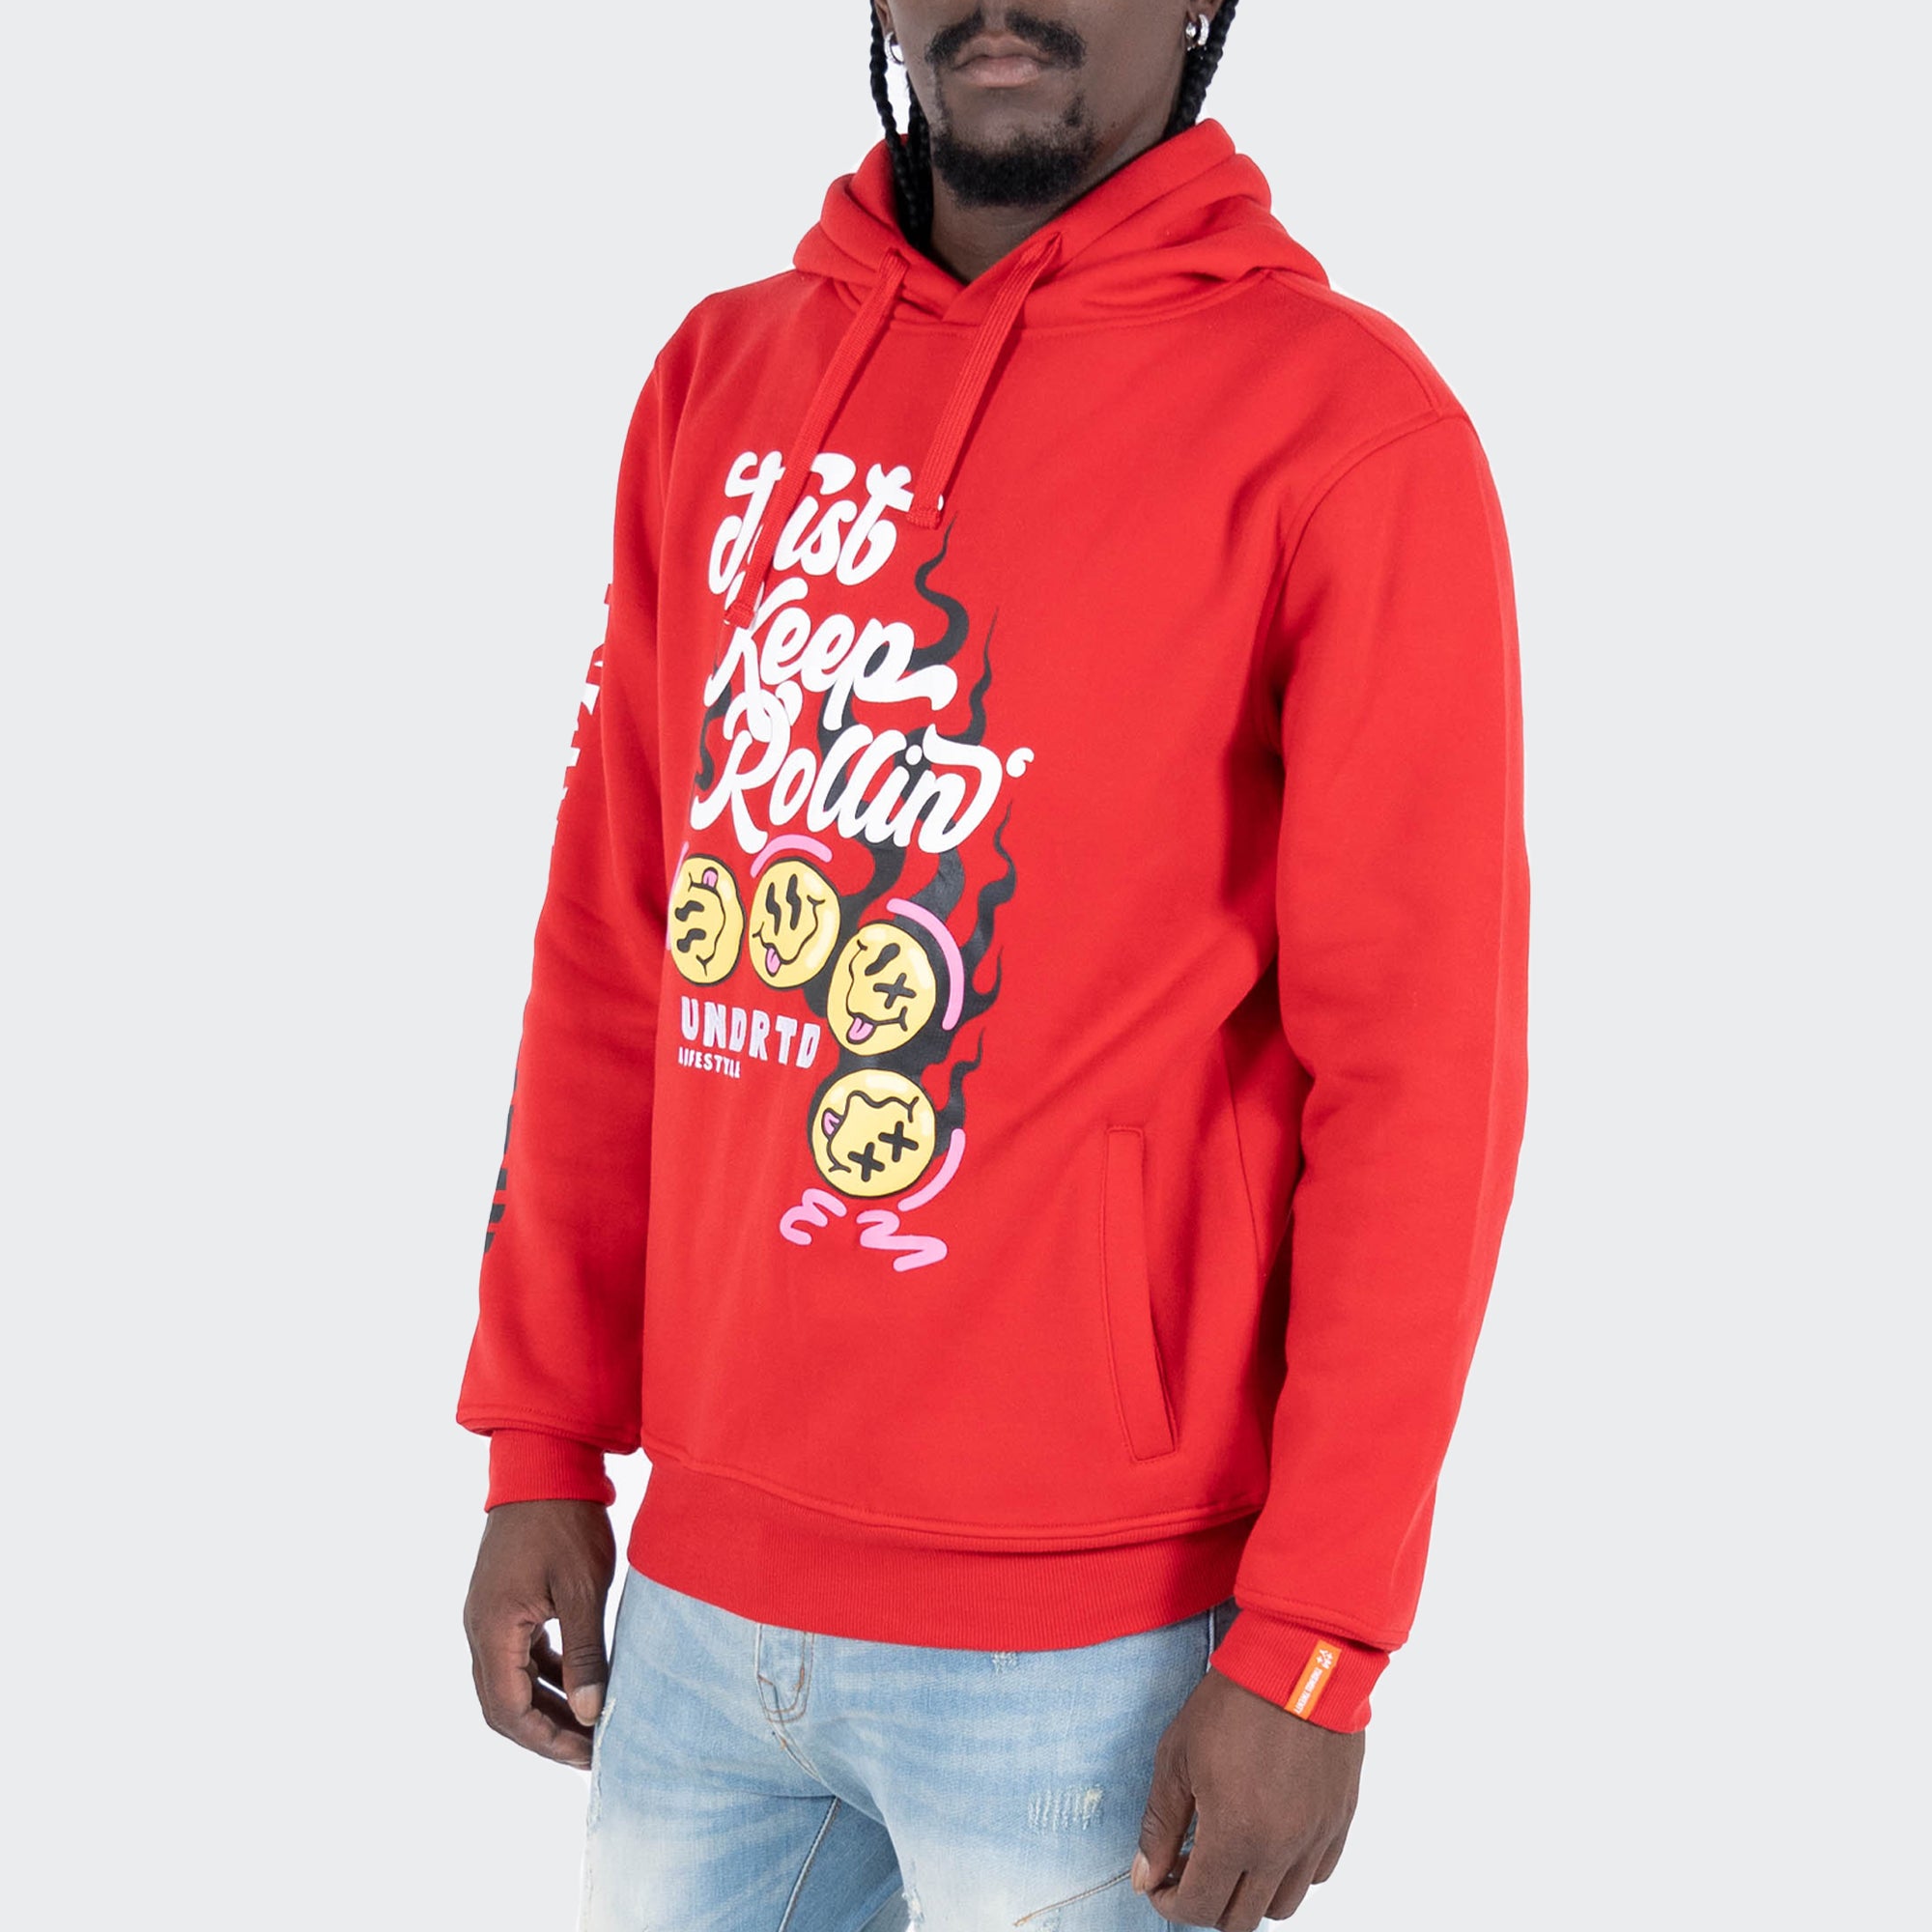 Men's Fleece Hoodie with Logo and 4 Cube Sleeves M / Red